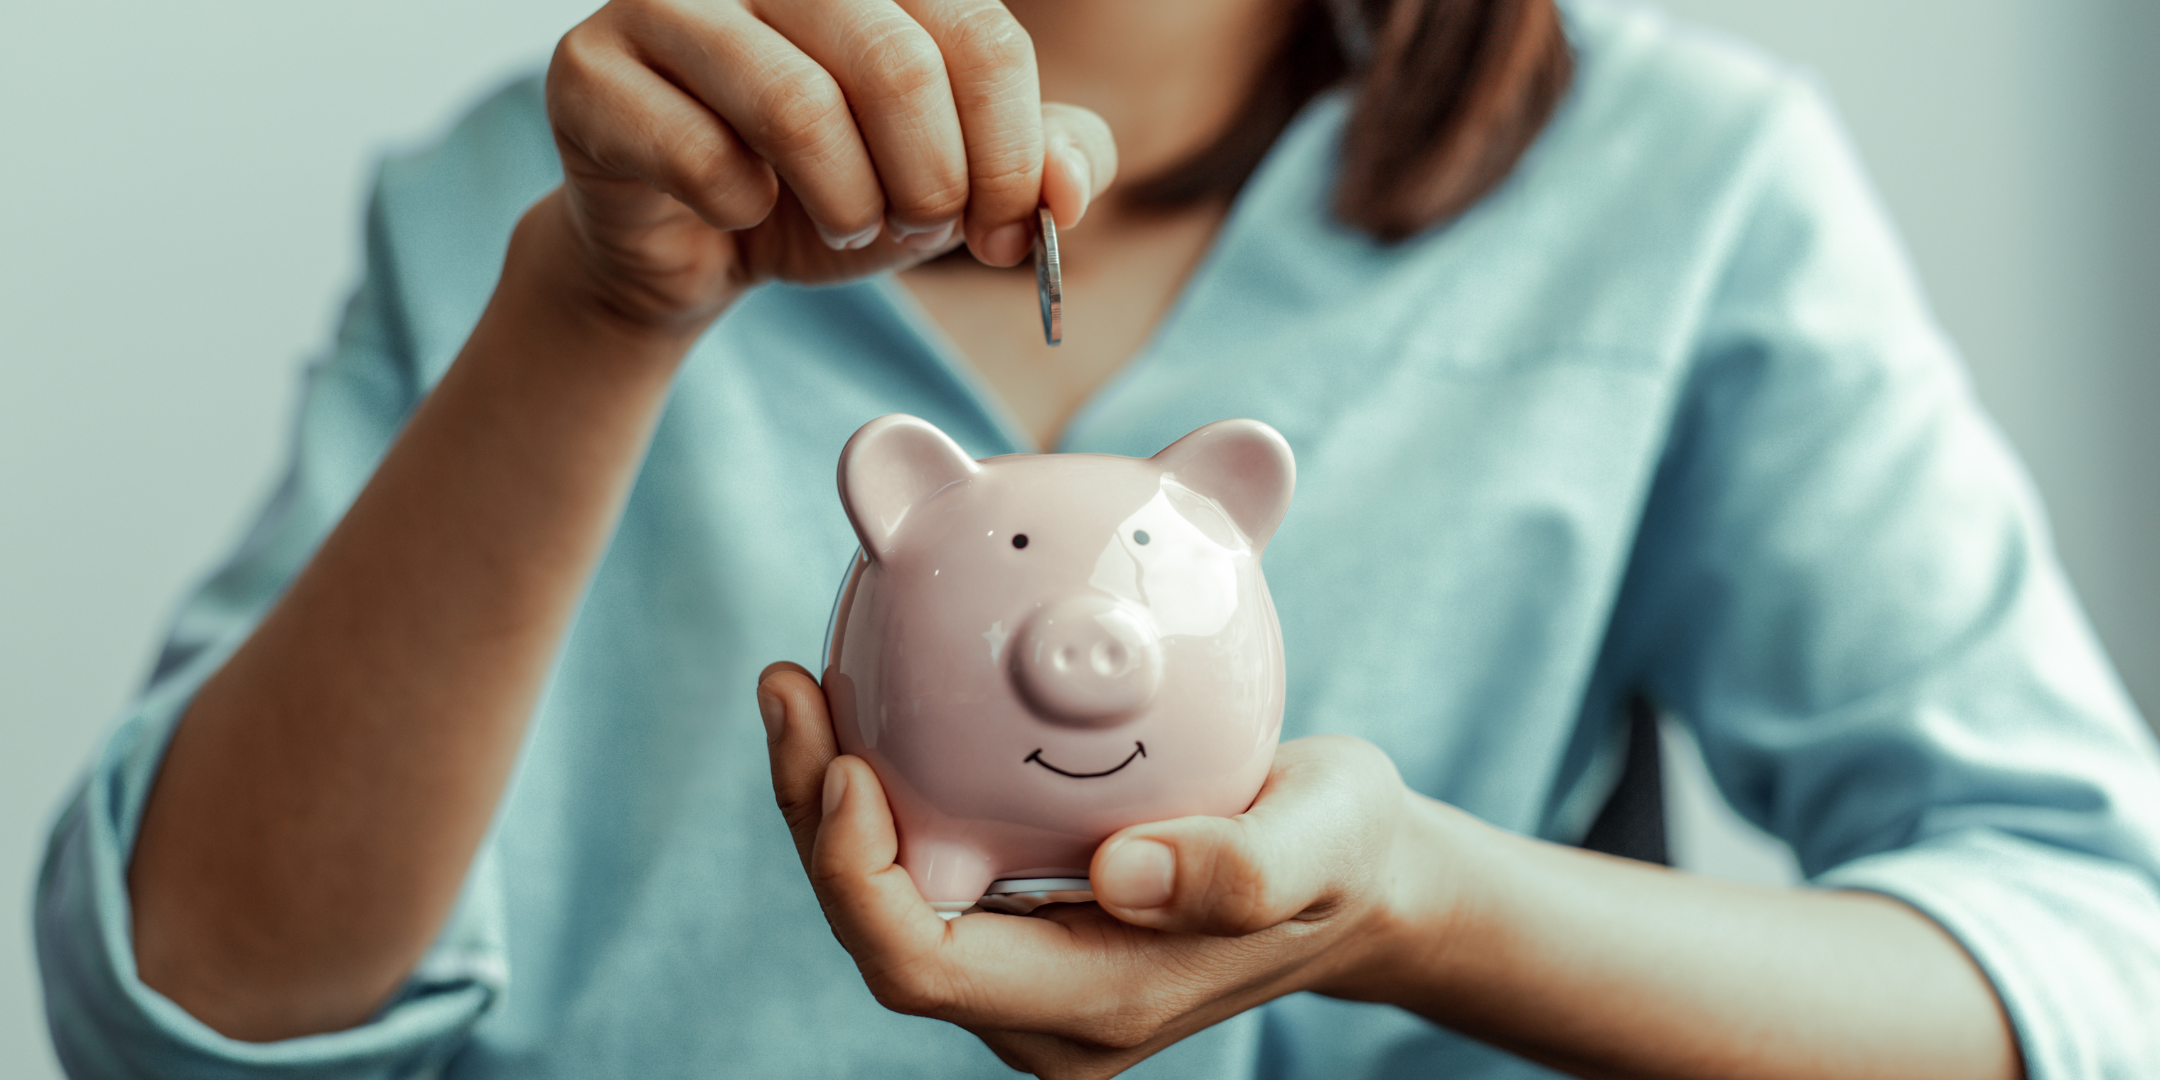 Woman putting a coin in a piggy bank, signifying great savings with The Comfort Club.